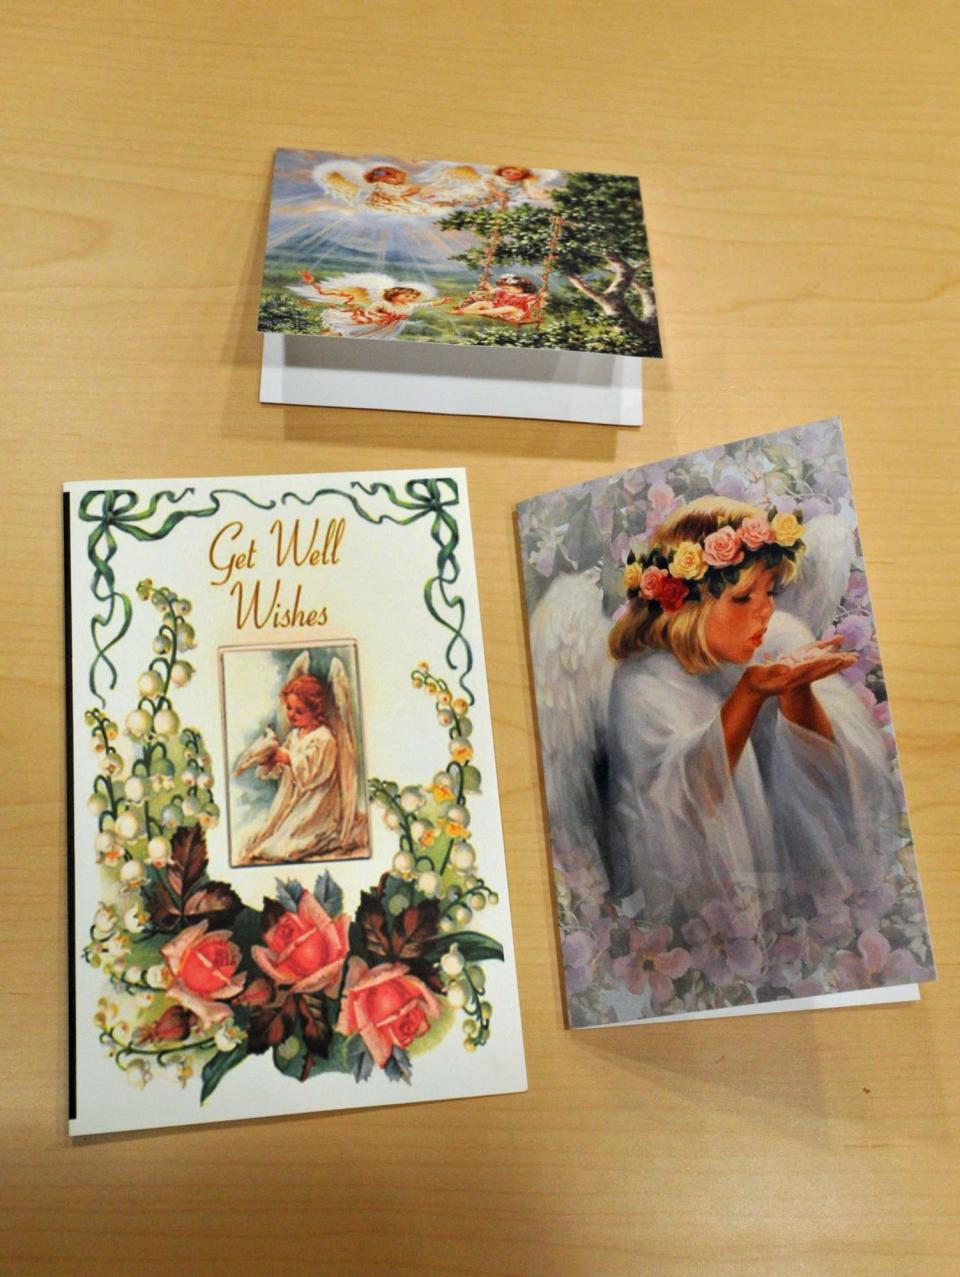 Some of the sympathy and get well cards Kate O'Sullivan, of Hingham, sends to clients and caregivers of Celtic Angels Home Health Care in Weymouth.